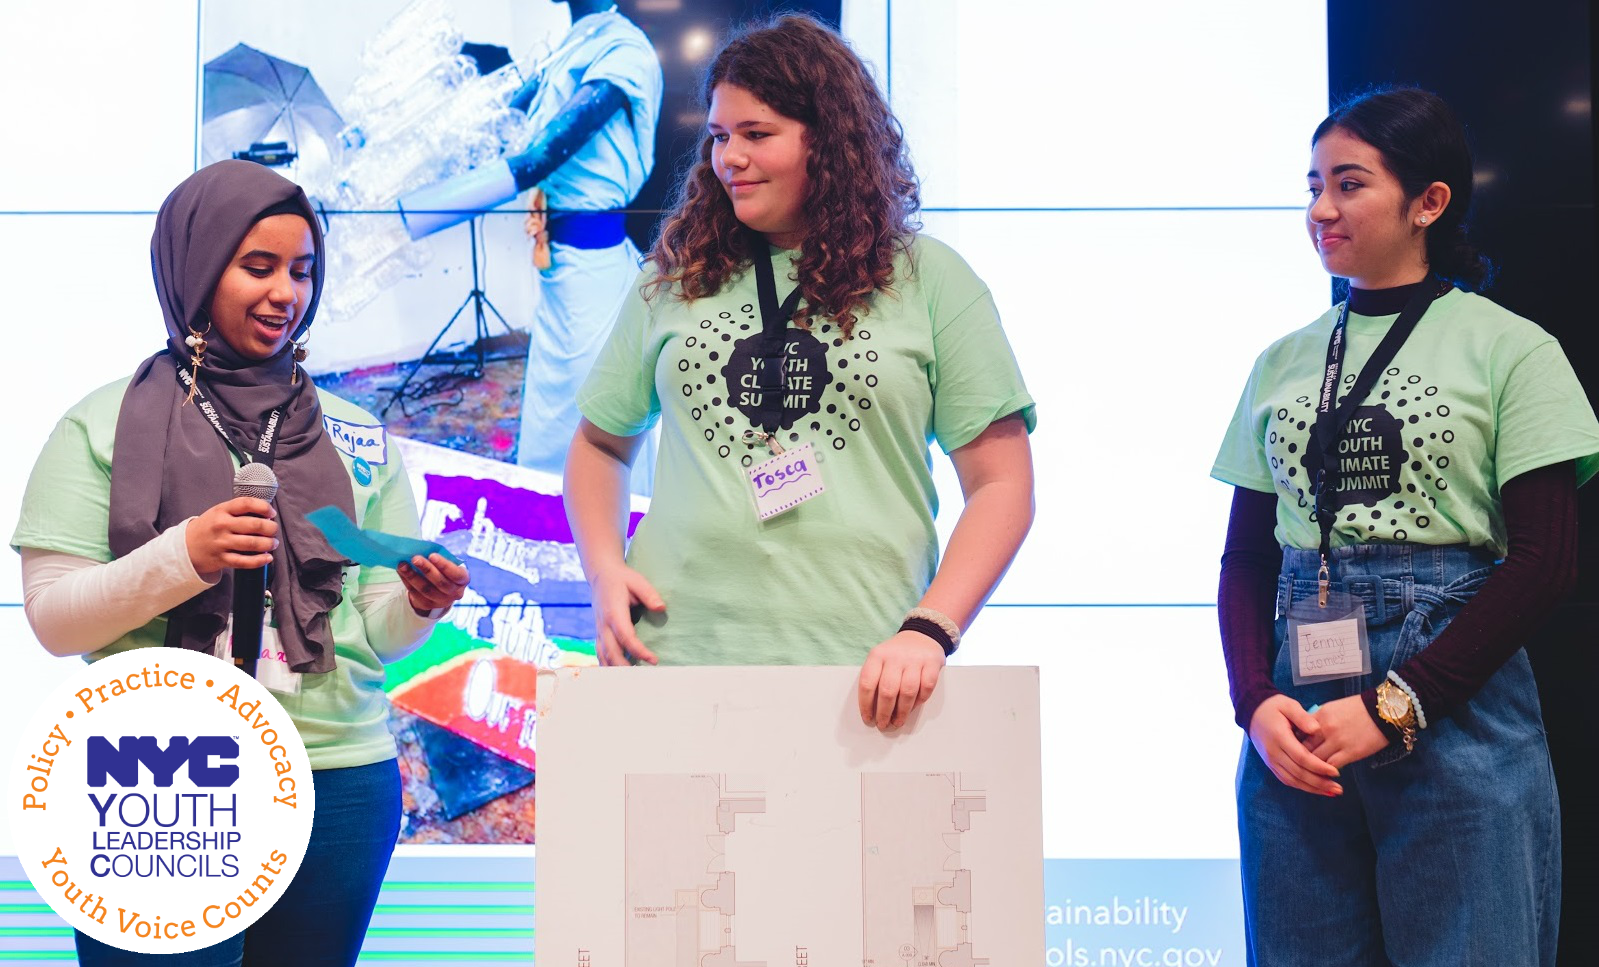 Three teenagers in matching green tee-shirts stand on stage presenting a poster board